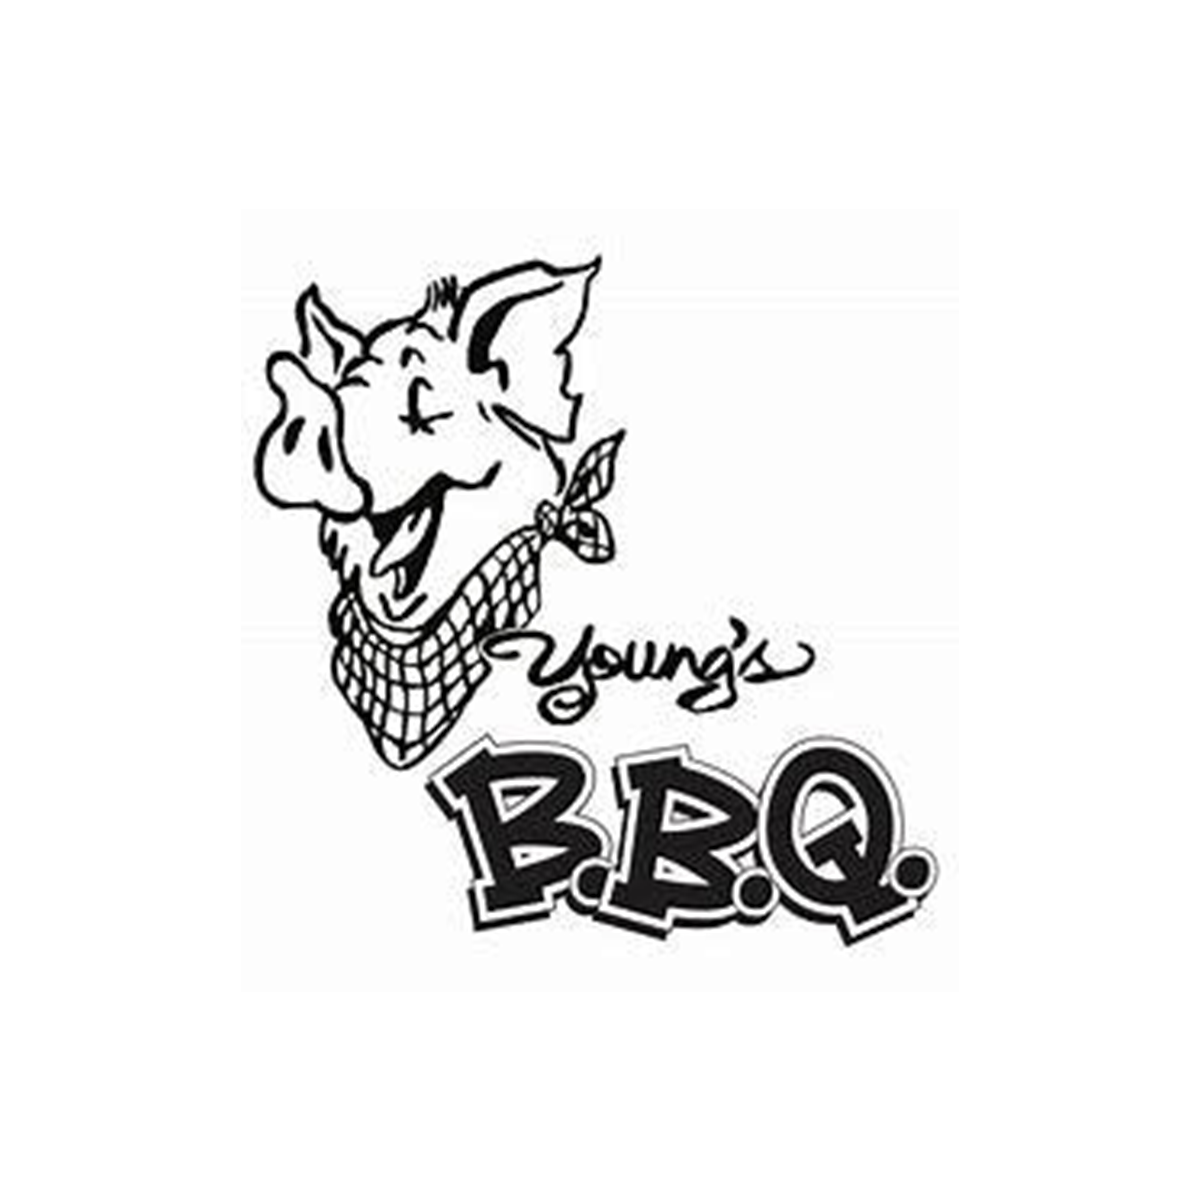 Young's BBQ restaurant logo